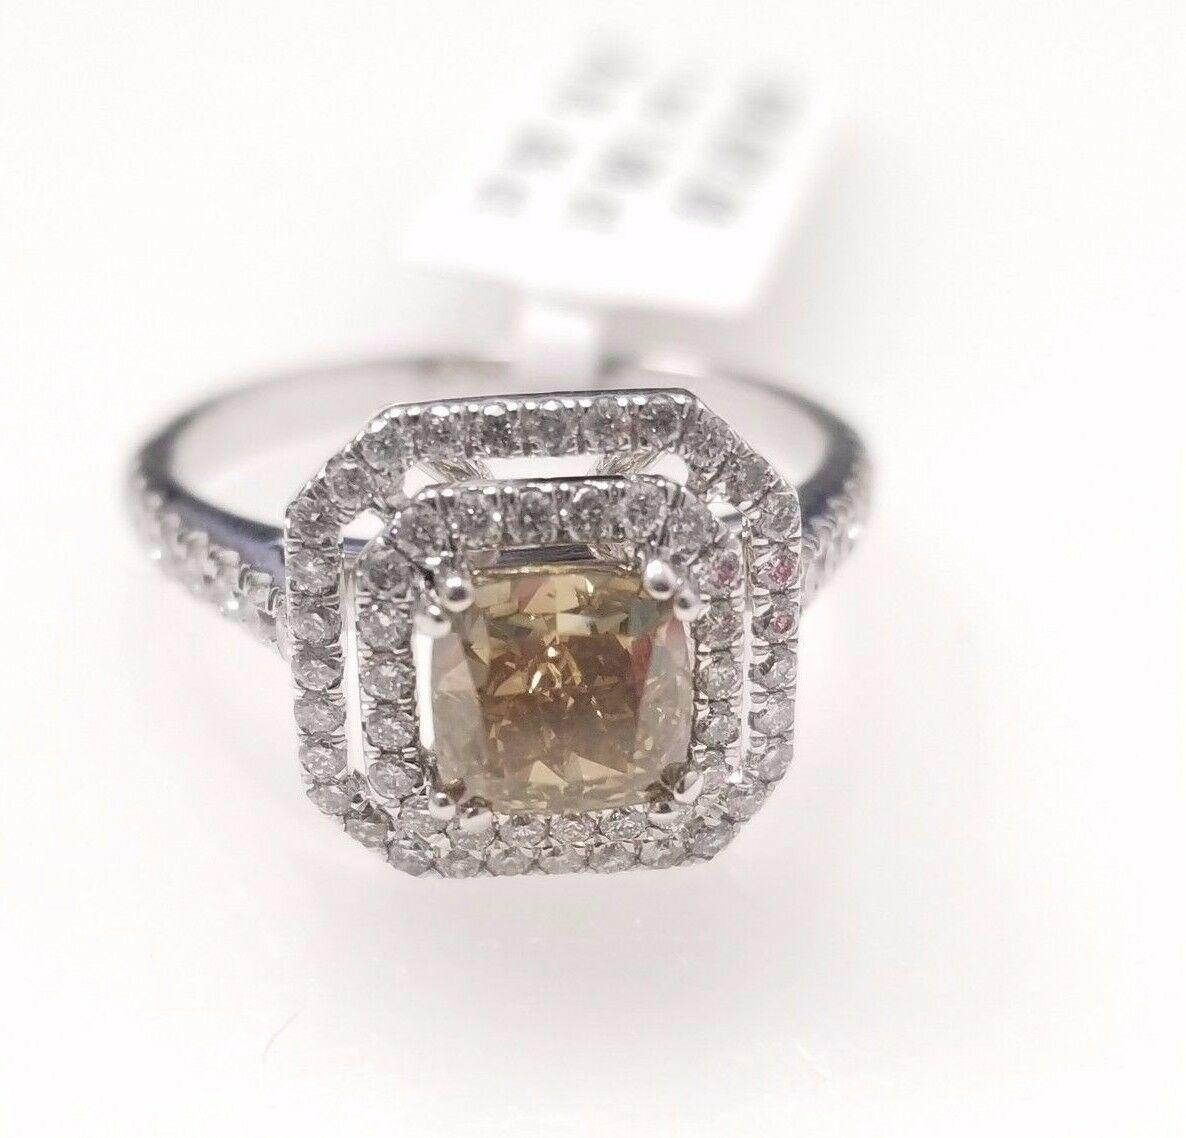 Natural fancy dark brown-greenish yellow cushion cut diamond weighing 1.08 carats. Certified by GIA. beautifully surrounded by round white diamonds and set in 4 prong double halo setting. Its transparency and luster are excellent. 18K white gold,